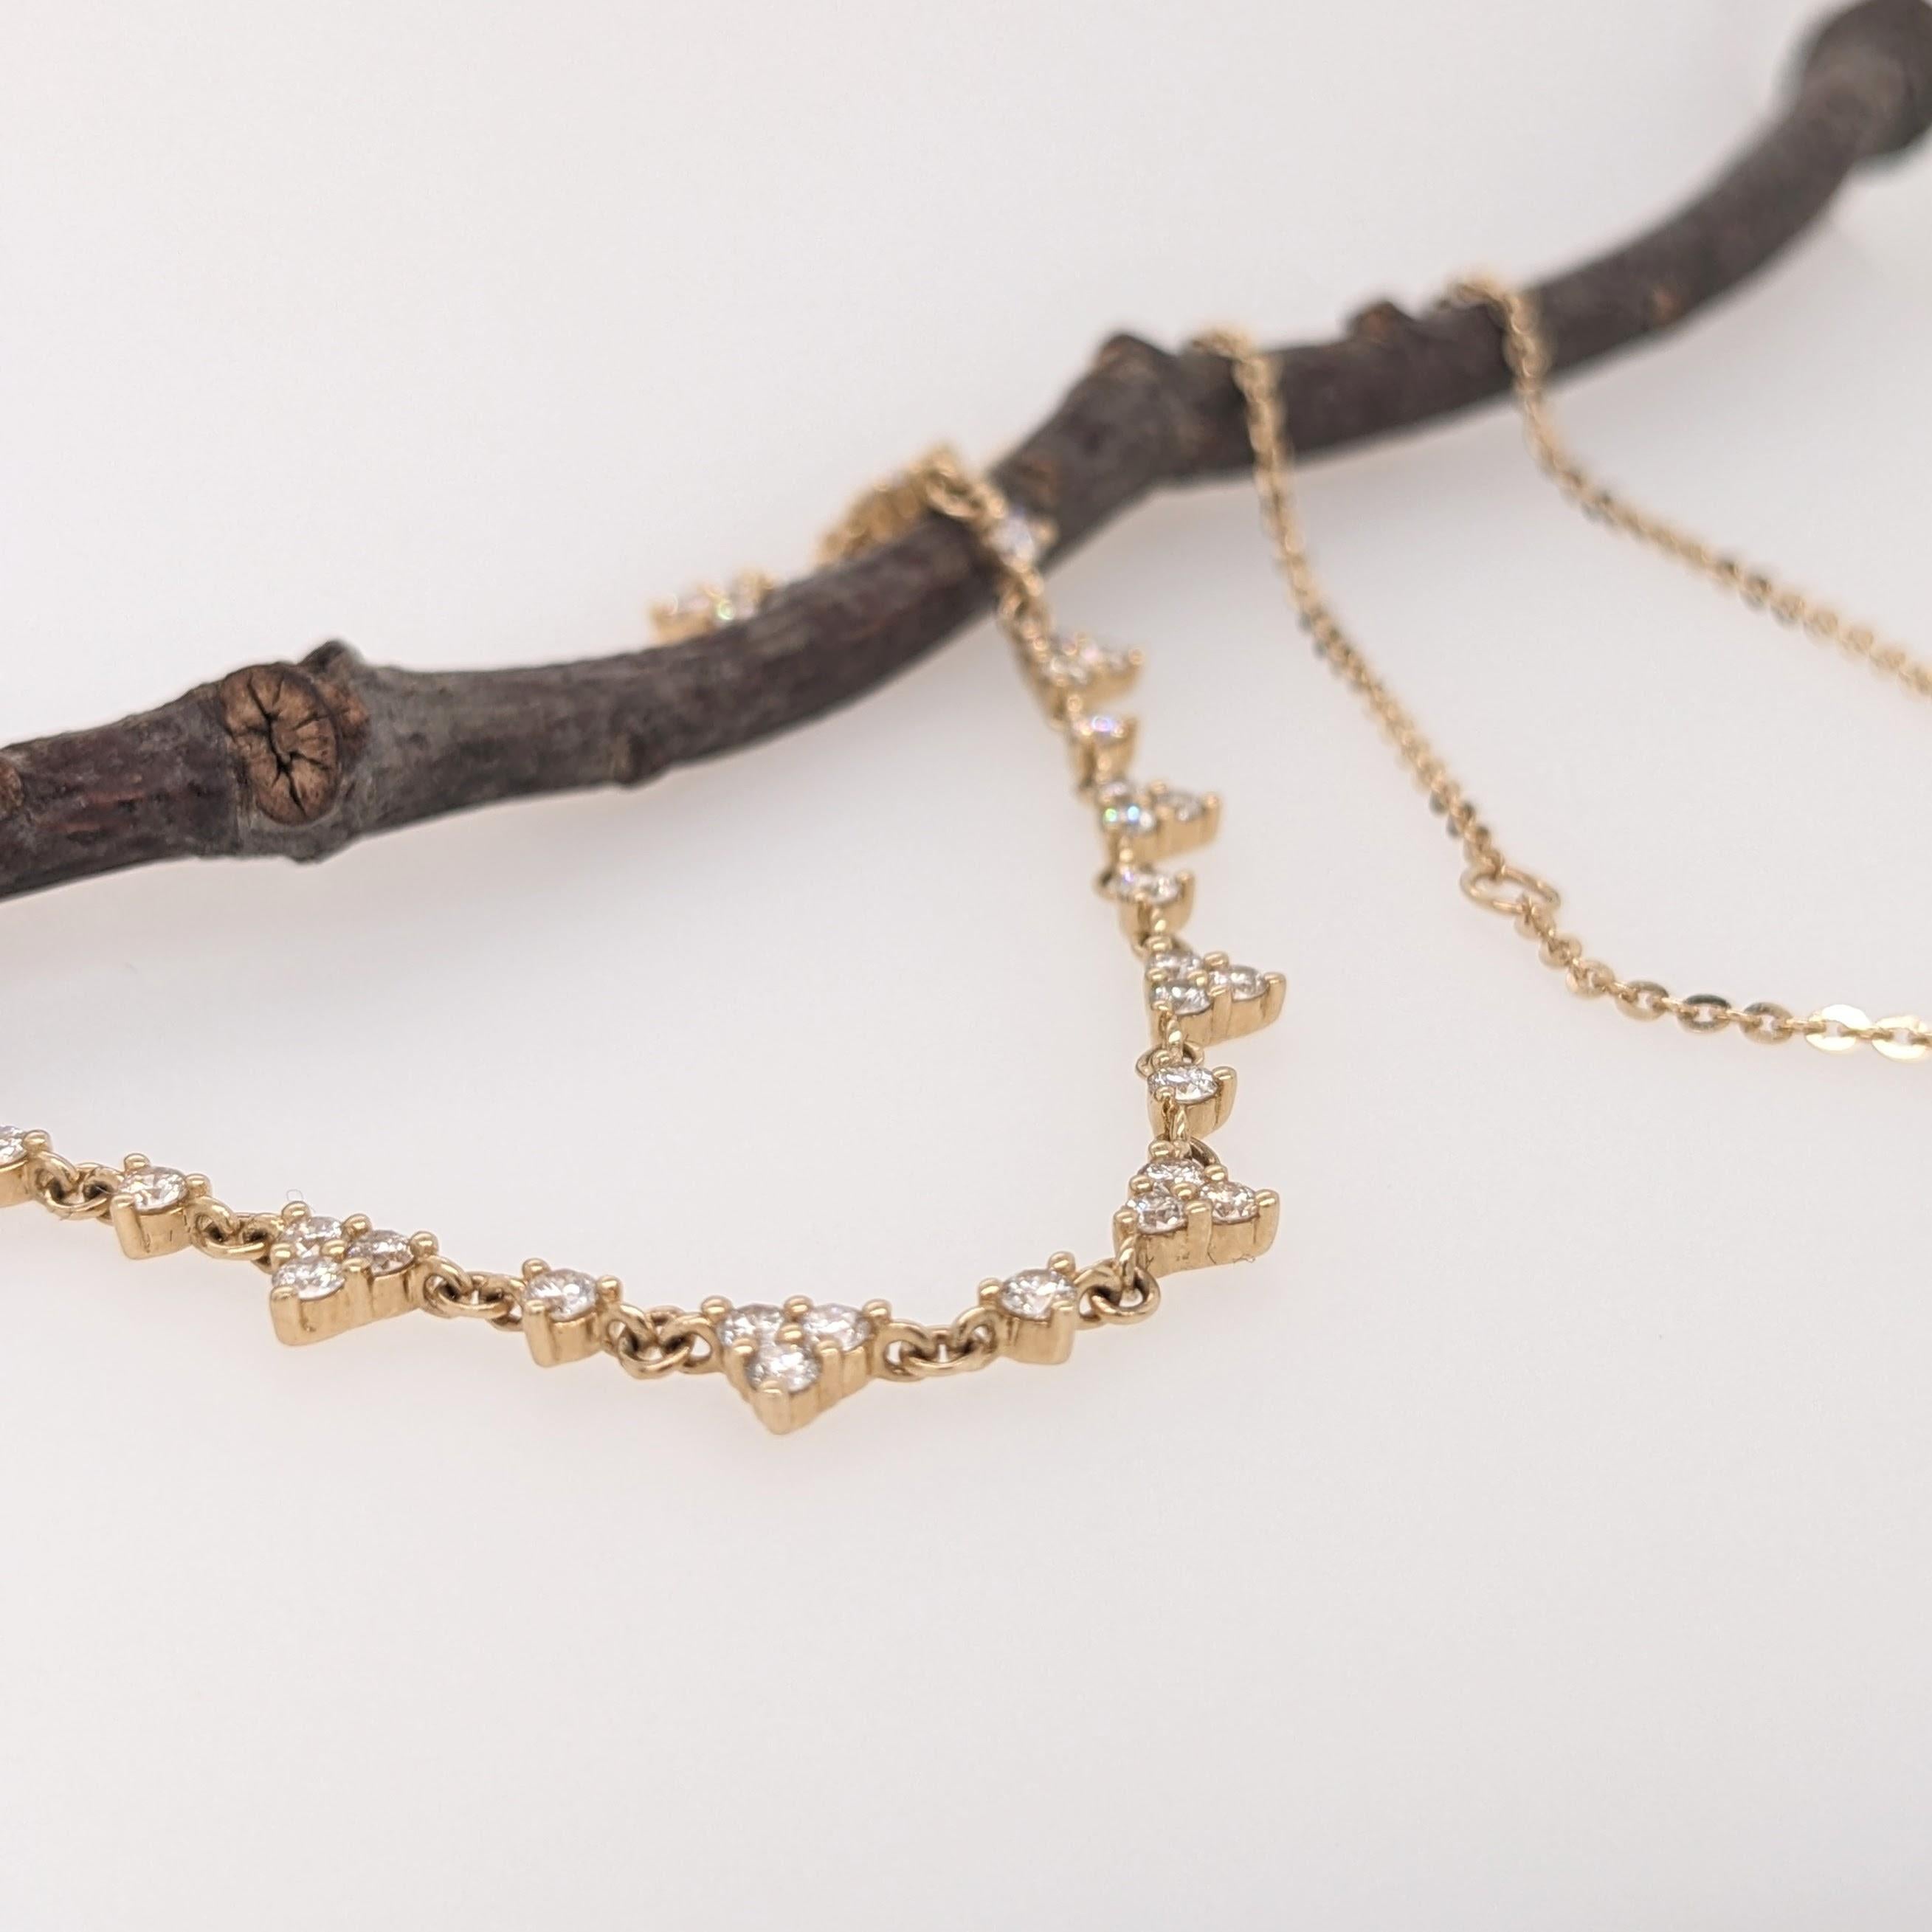 A lovely necklace with triangle shaped diamond studded accents! A dainty chain to elevate any outfit.

Specifications:

Item Type: Necklace
Adjustable 16-18inch
Gold Purity: 14k
Gold Weight: 6.67 grams
Gold Color: Solid Yellow Gold

Stone